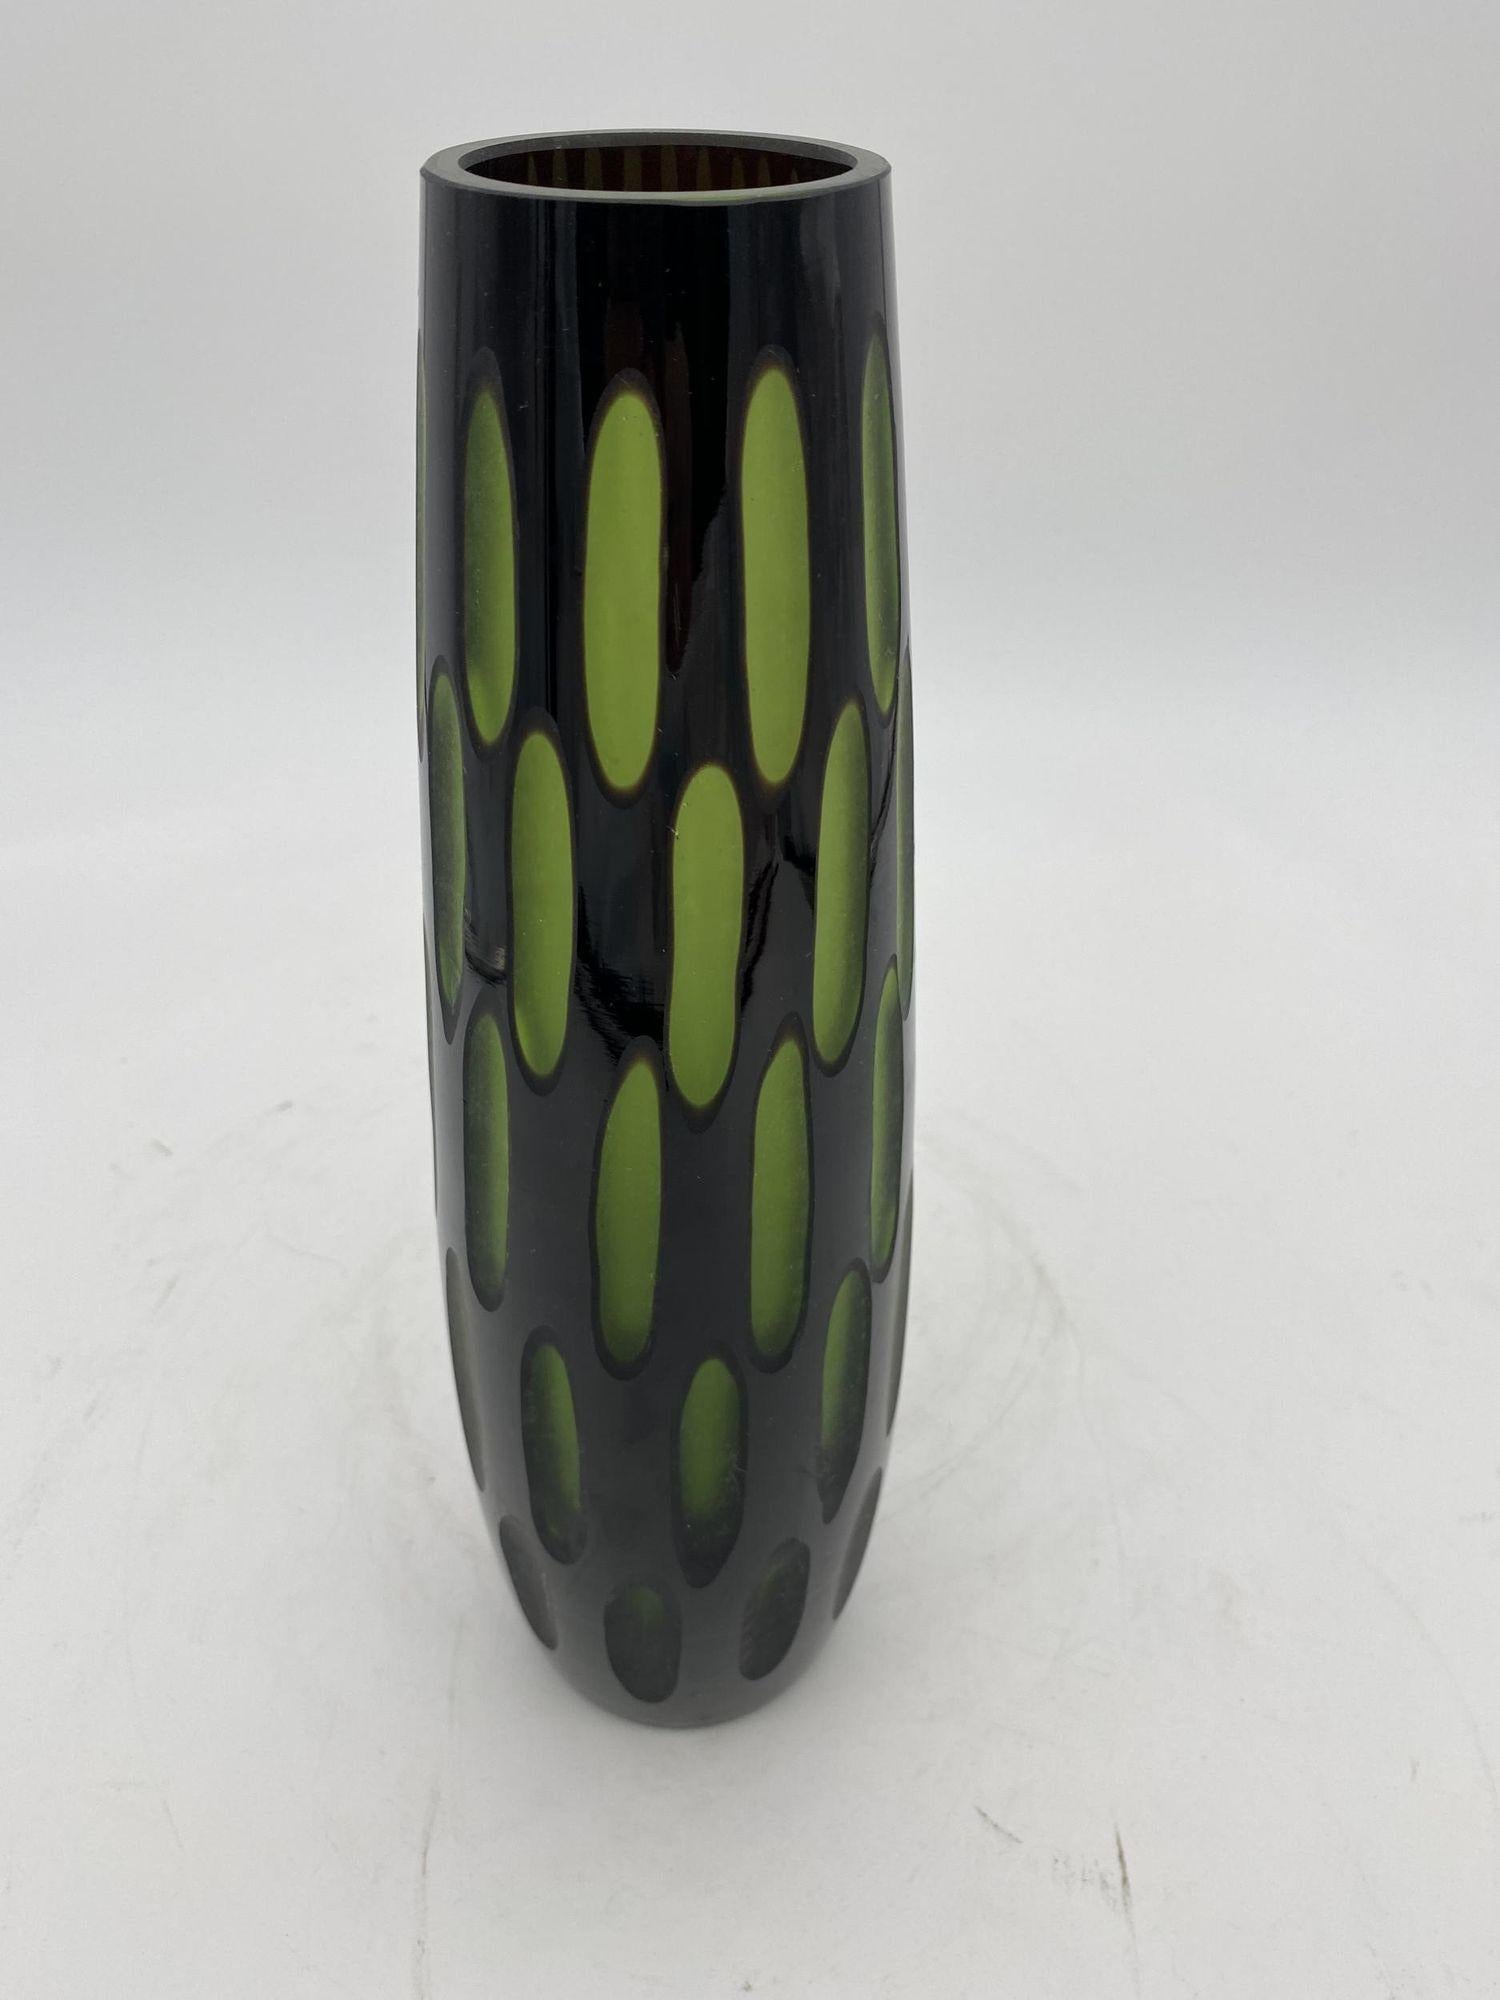 Original 1960s two-tone black/green cut two-layered Murano glass vase. The vase features a black outer color and green inner layer which appears to almost when hit by the light. The slender tall form will bring a whimsical flair to any room.

1960,